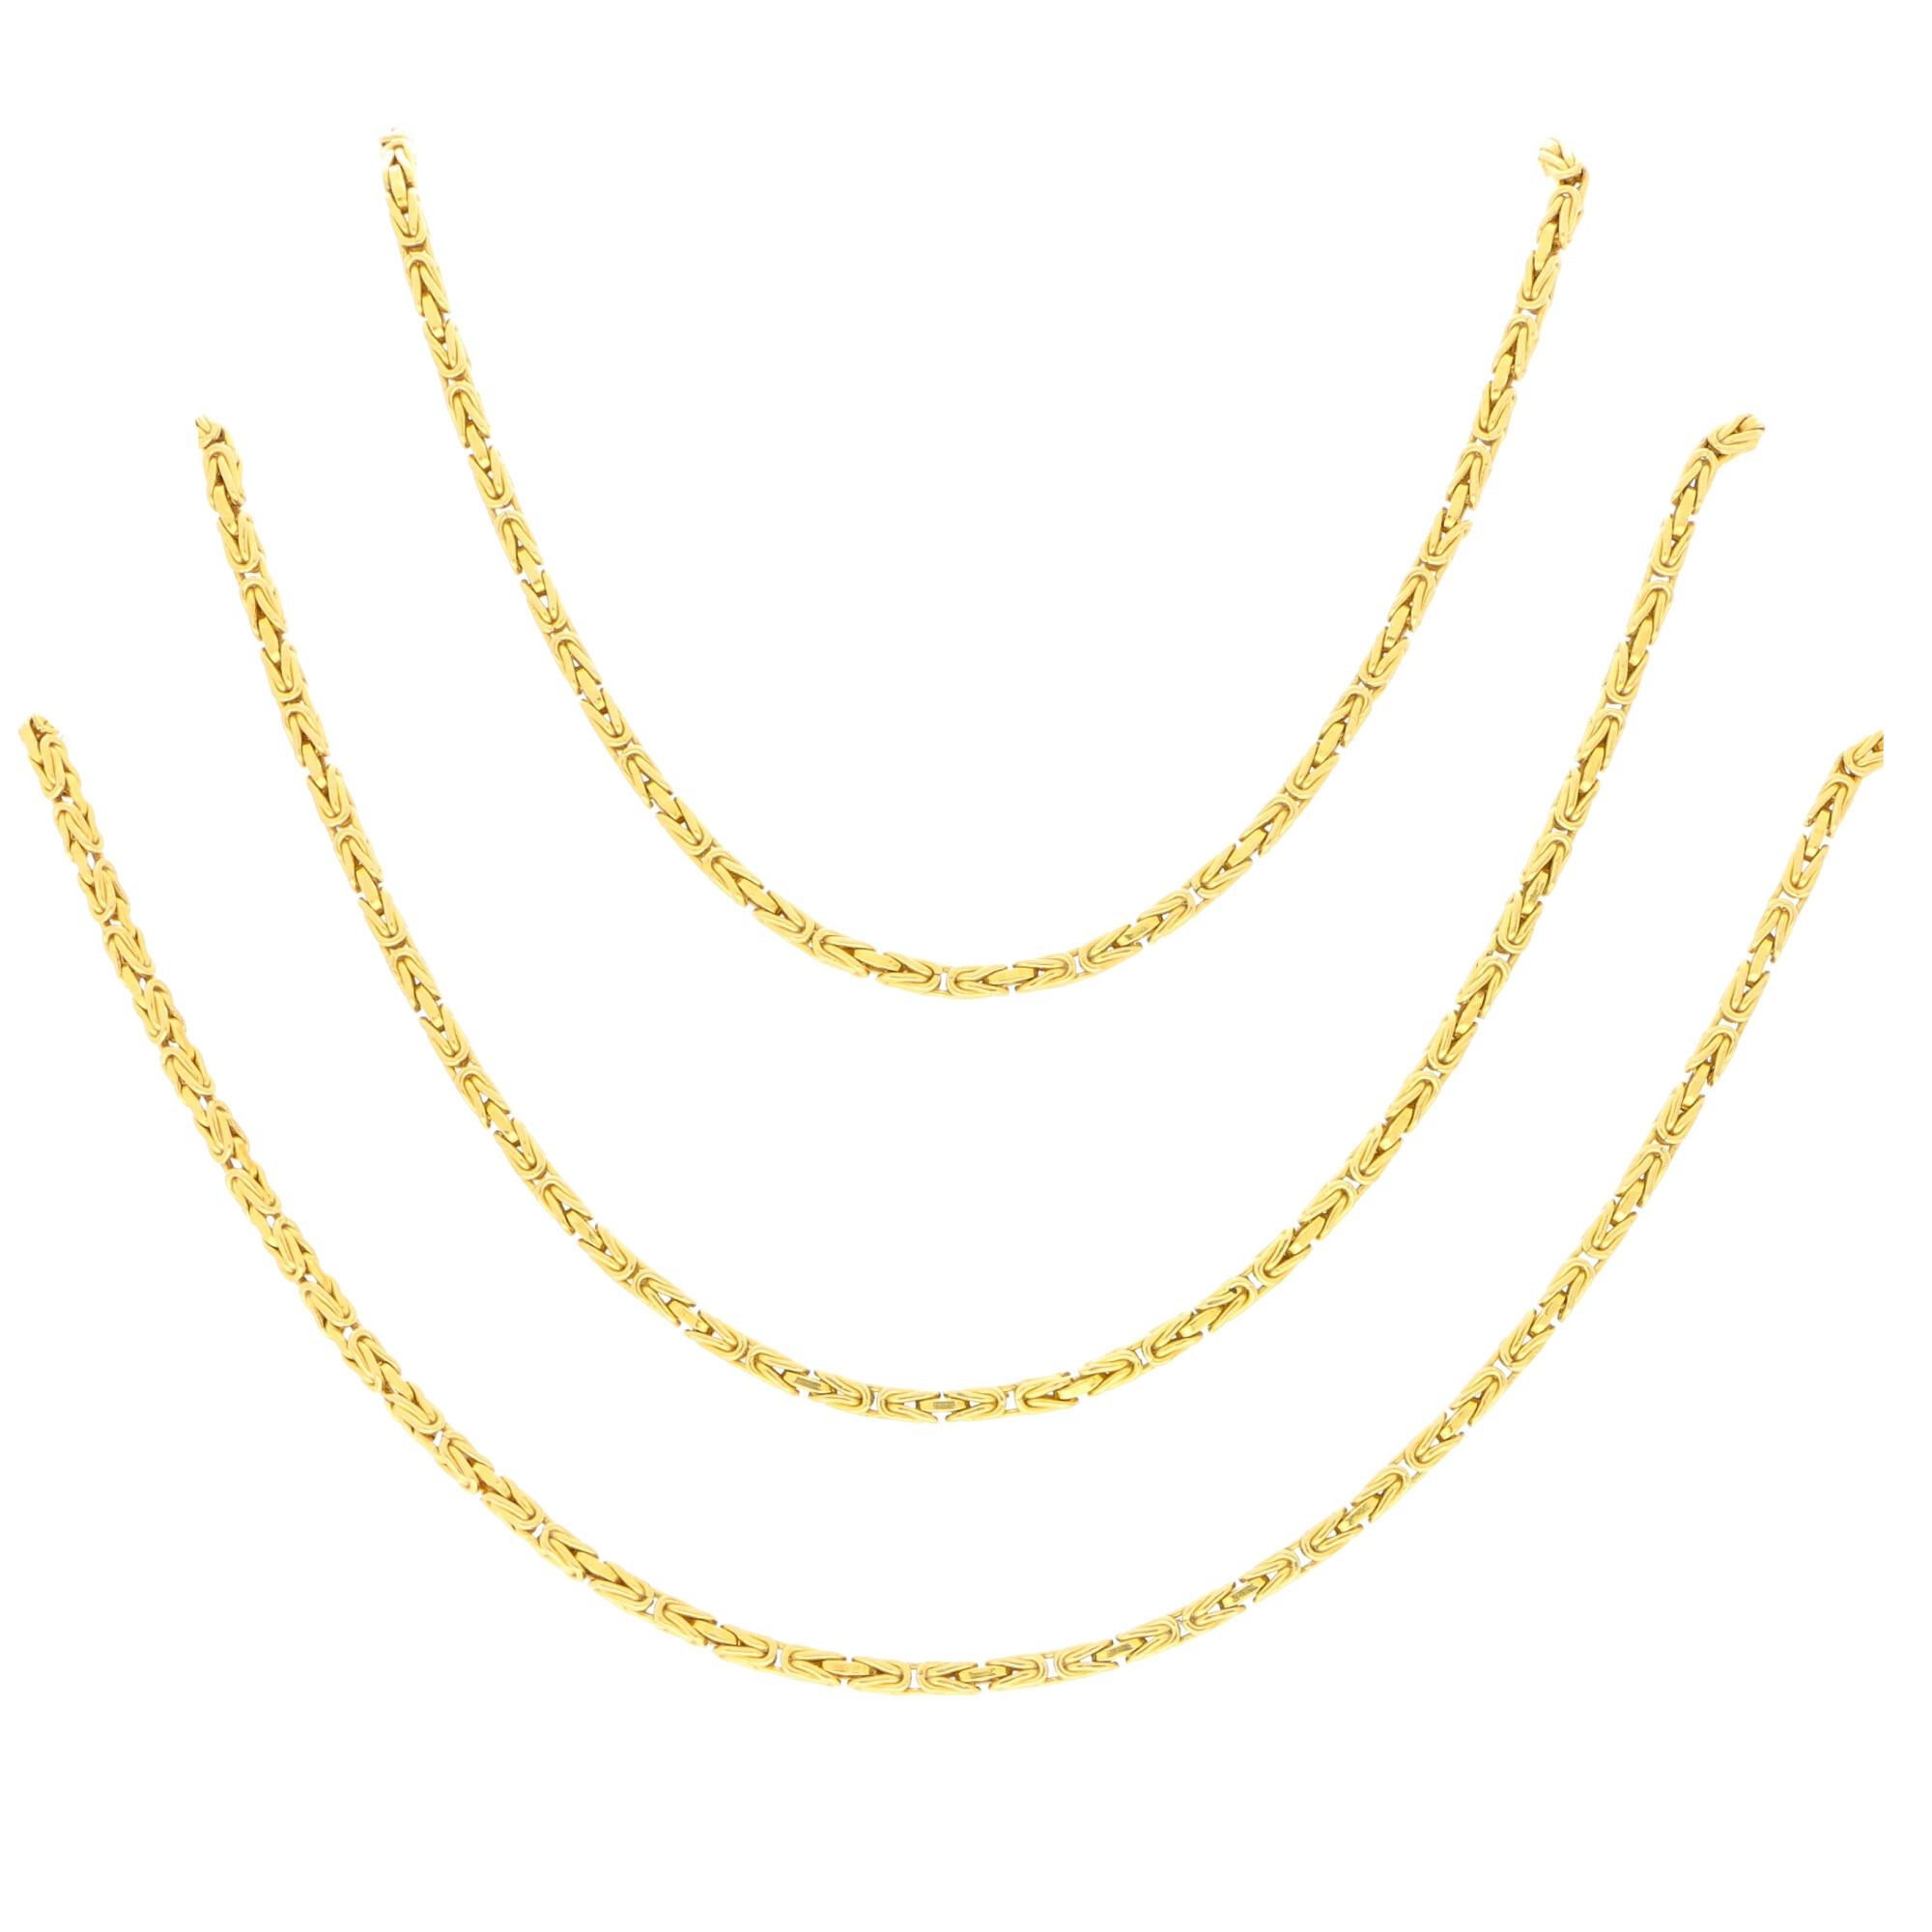 An extremely stylish vintage Chaumet 36-inch chain link necklace set in 18k yellow gold.

The chain is composed of a number of articulated links, all of which are designed in an Etruscan-style design. Due to the length and the design, this piece